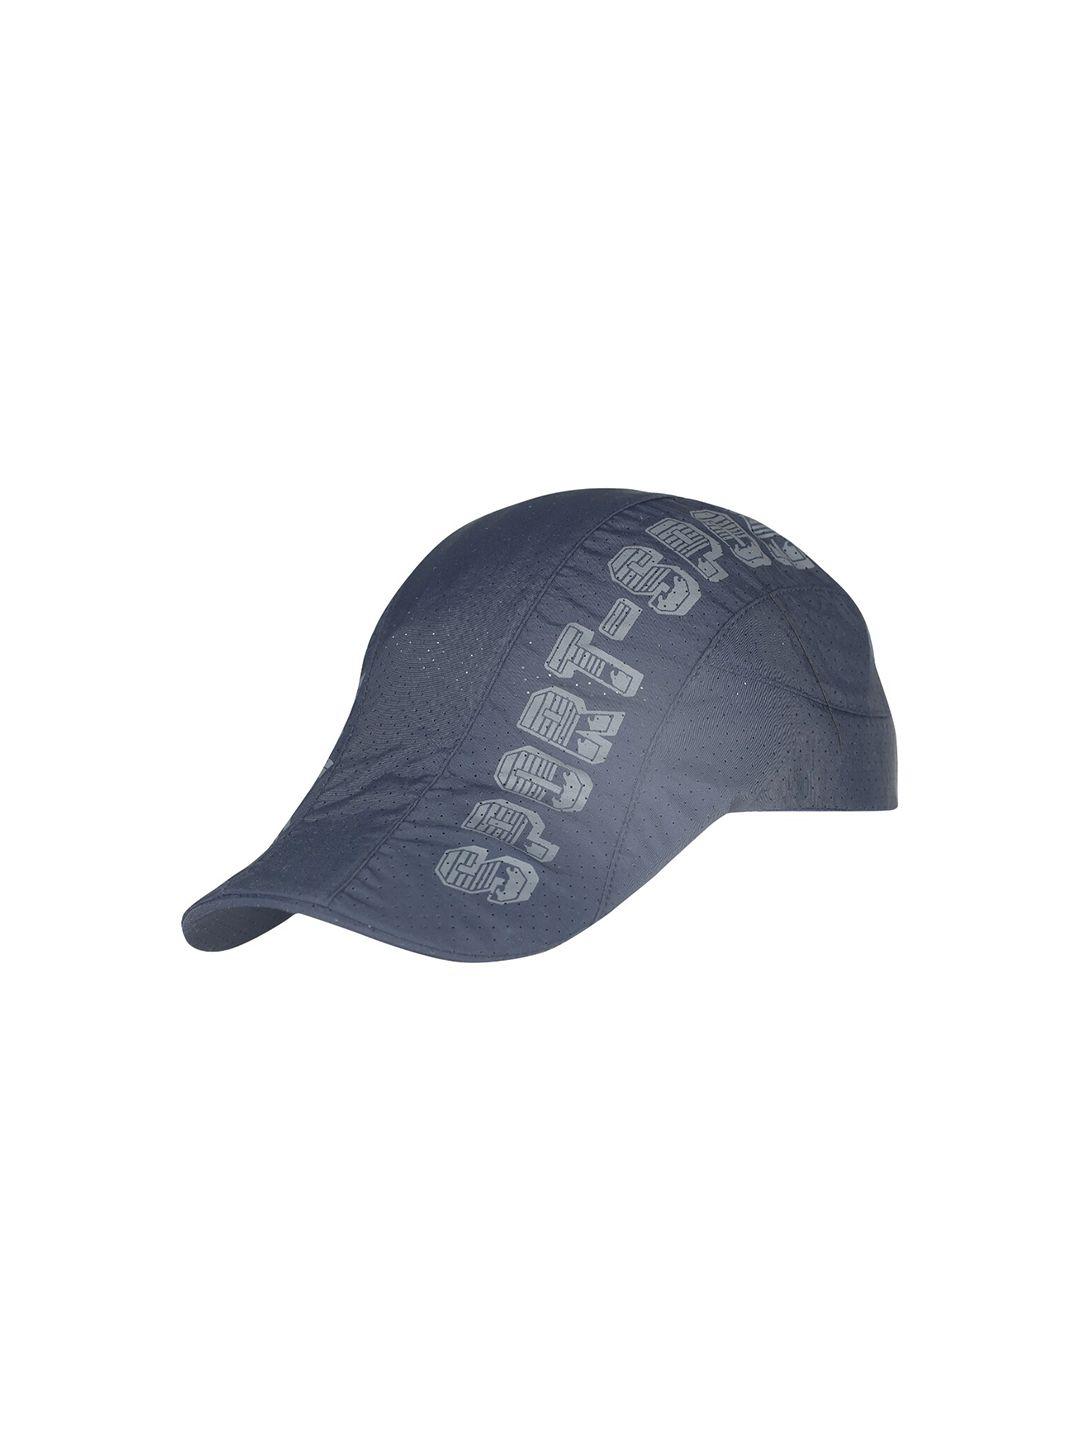 isweven unisex blue solid ascot caps